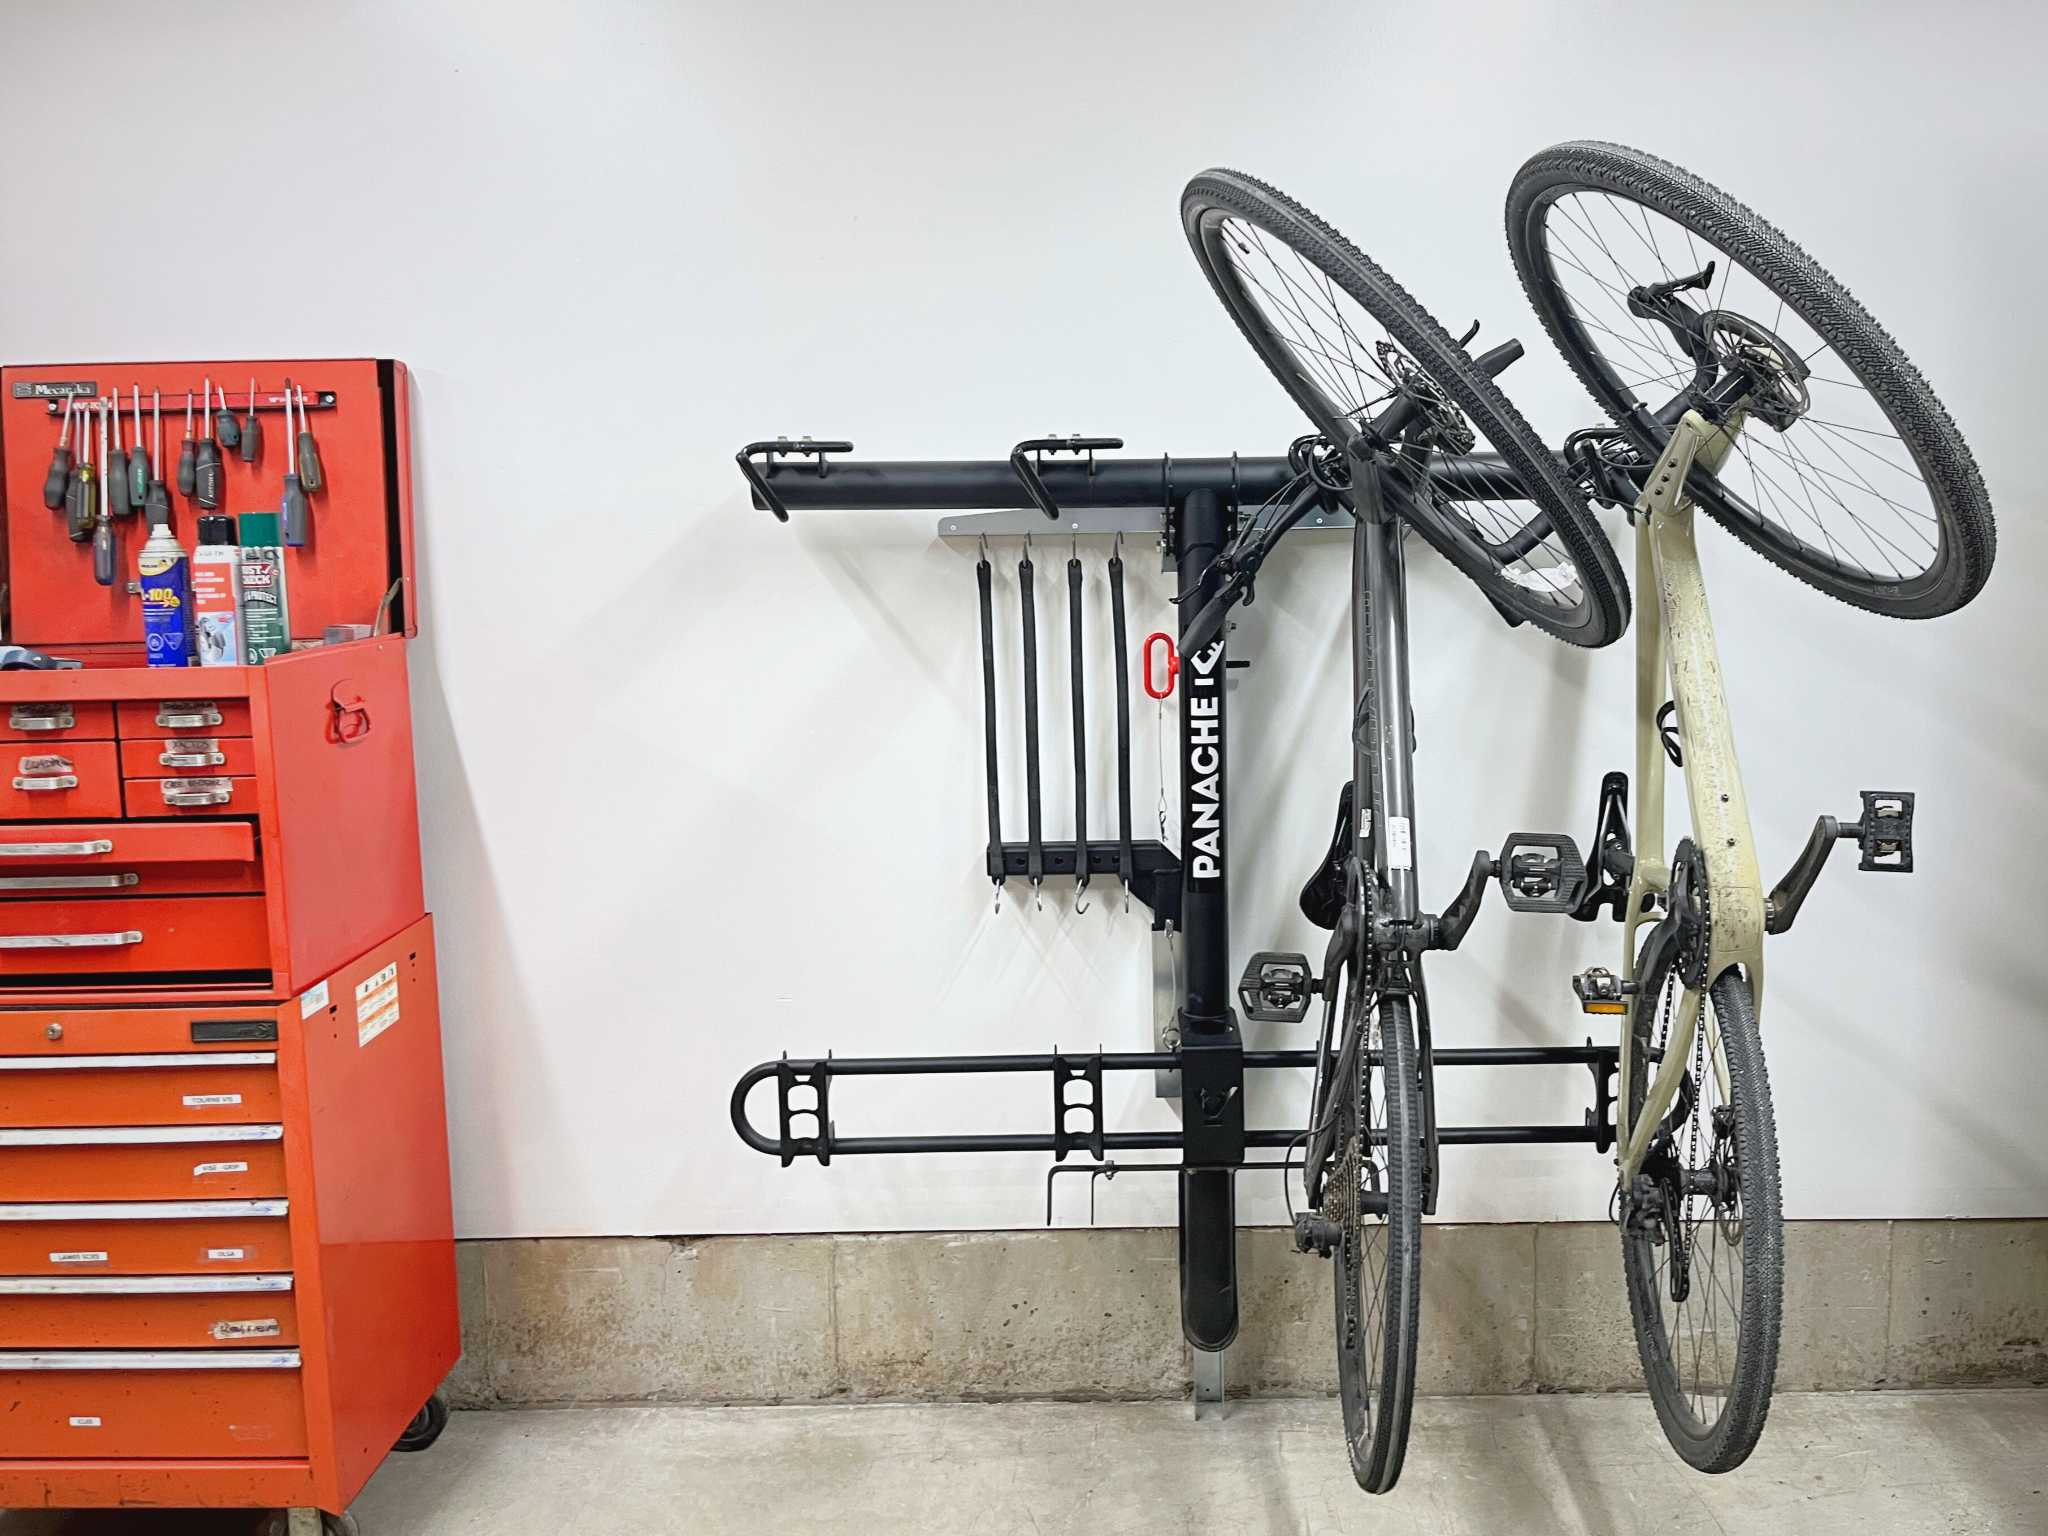 Rackarack wallmount installed on a wall with vertical bike rack and bikes attached to it for storage